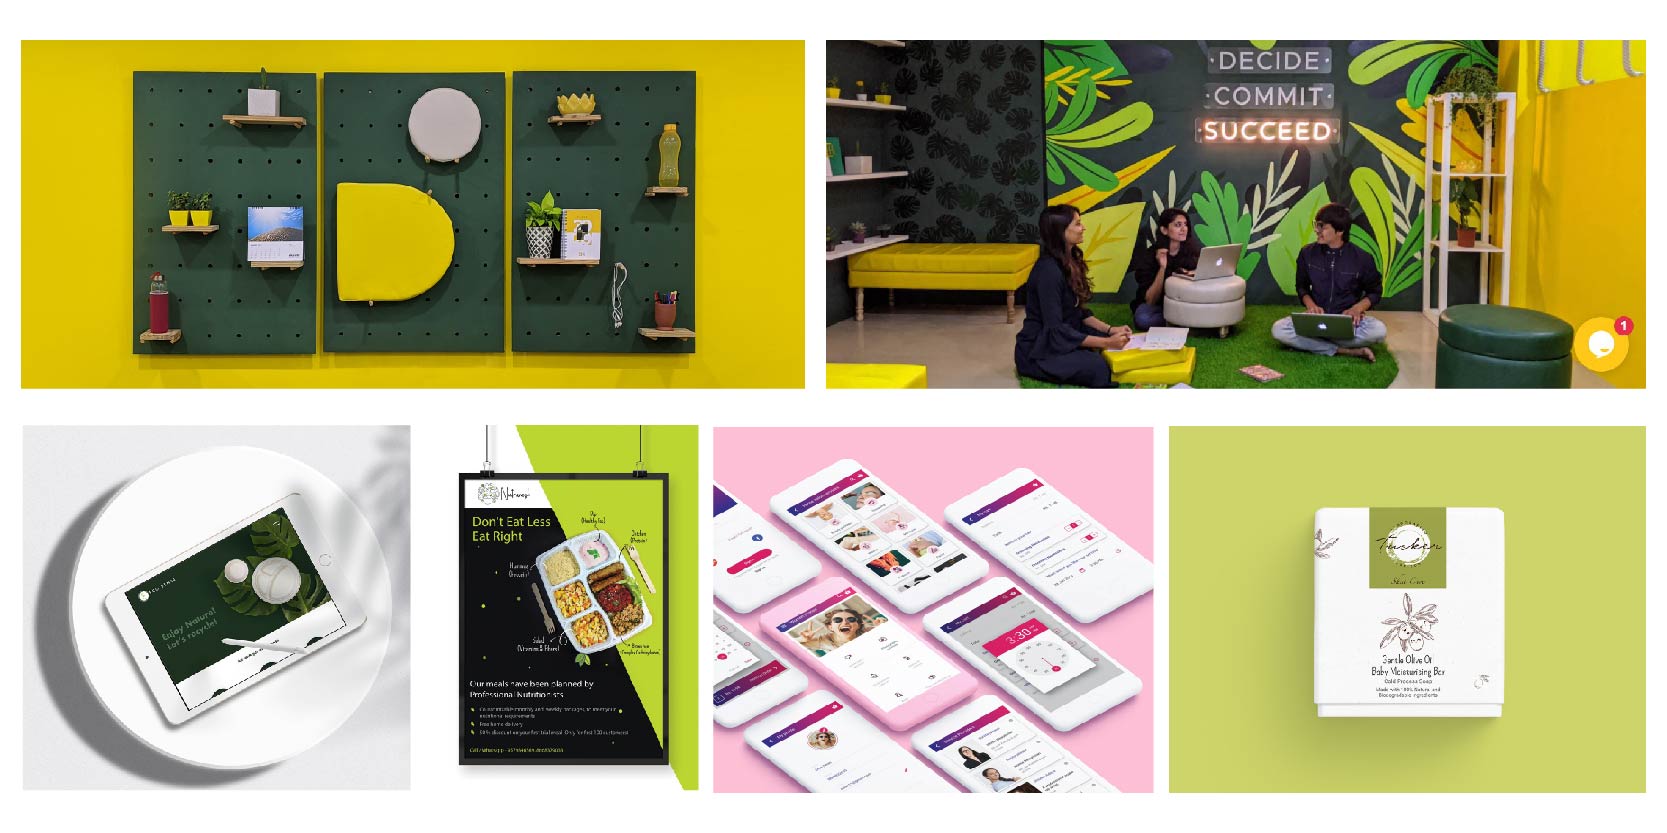 13 Most Creative Design Agency Profiles on Behance